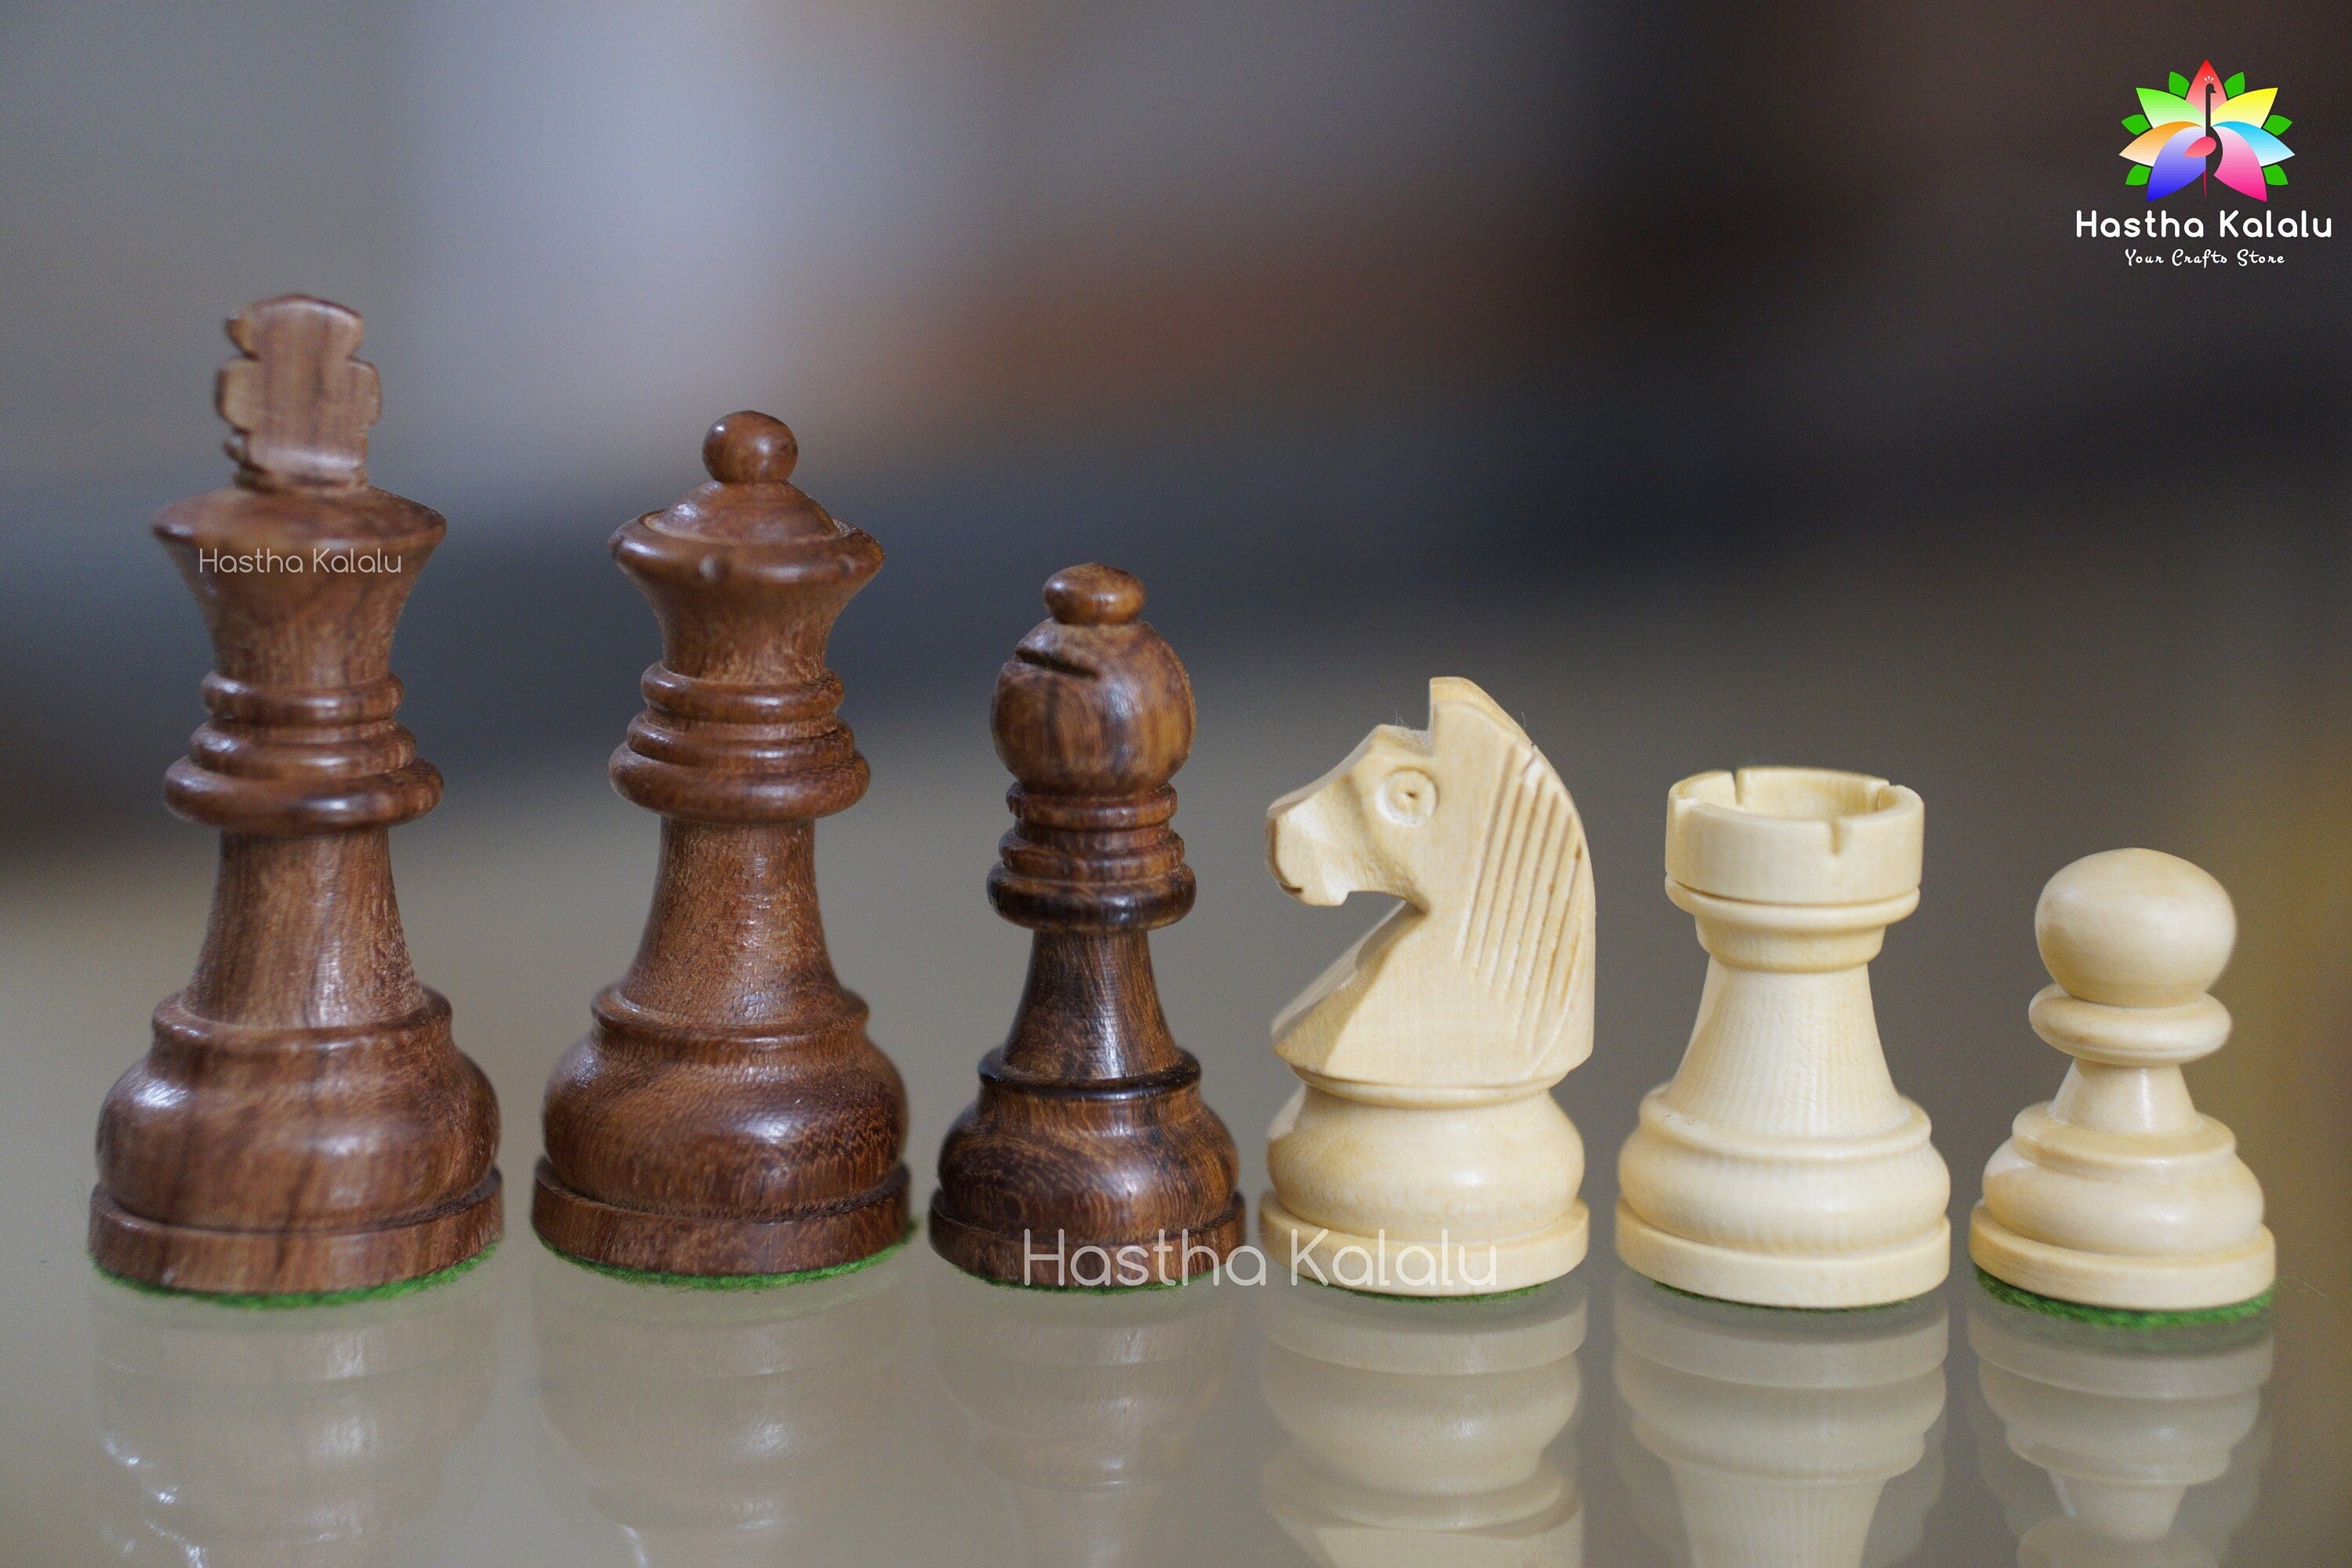 Combo of Tournament Series Staunton Wooden Chessmen with German Knight in  Ebonized Boxwood & Box Wood - 3 King with Sheesham Wood Chess Board and  Storage Pouch